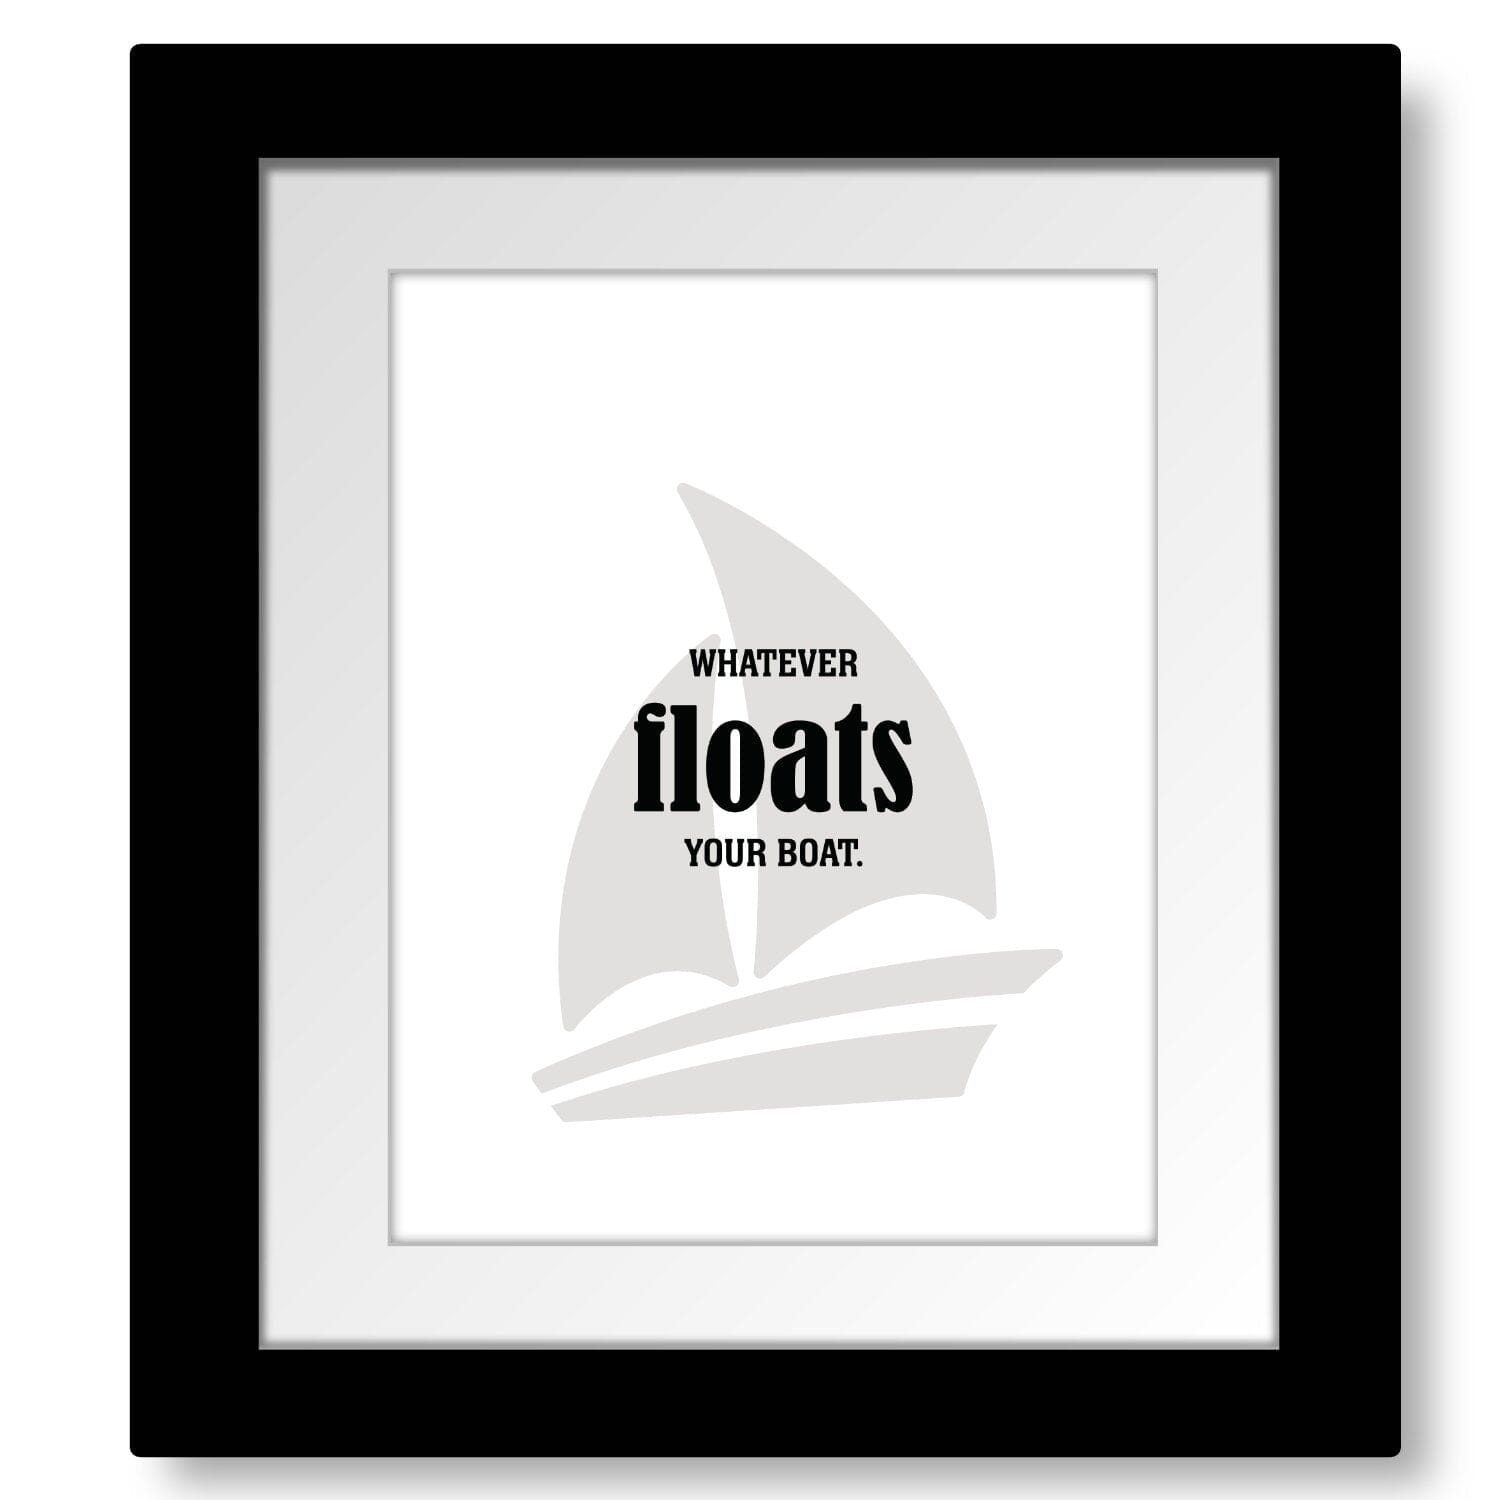 Whatever Floats Your Boat - Wise and Witty Wall Print Art Wise and Wiseass Quotes Song Lyrics Art 8x10 Framed and Matted Print 